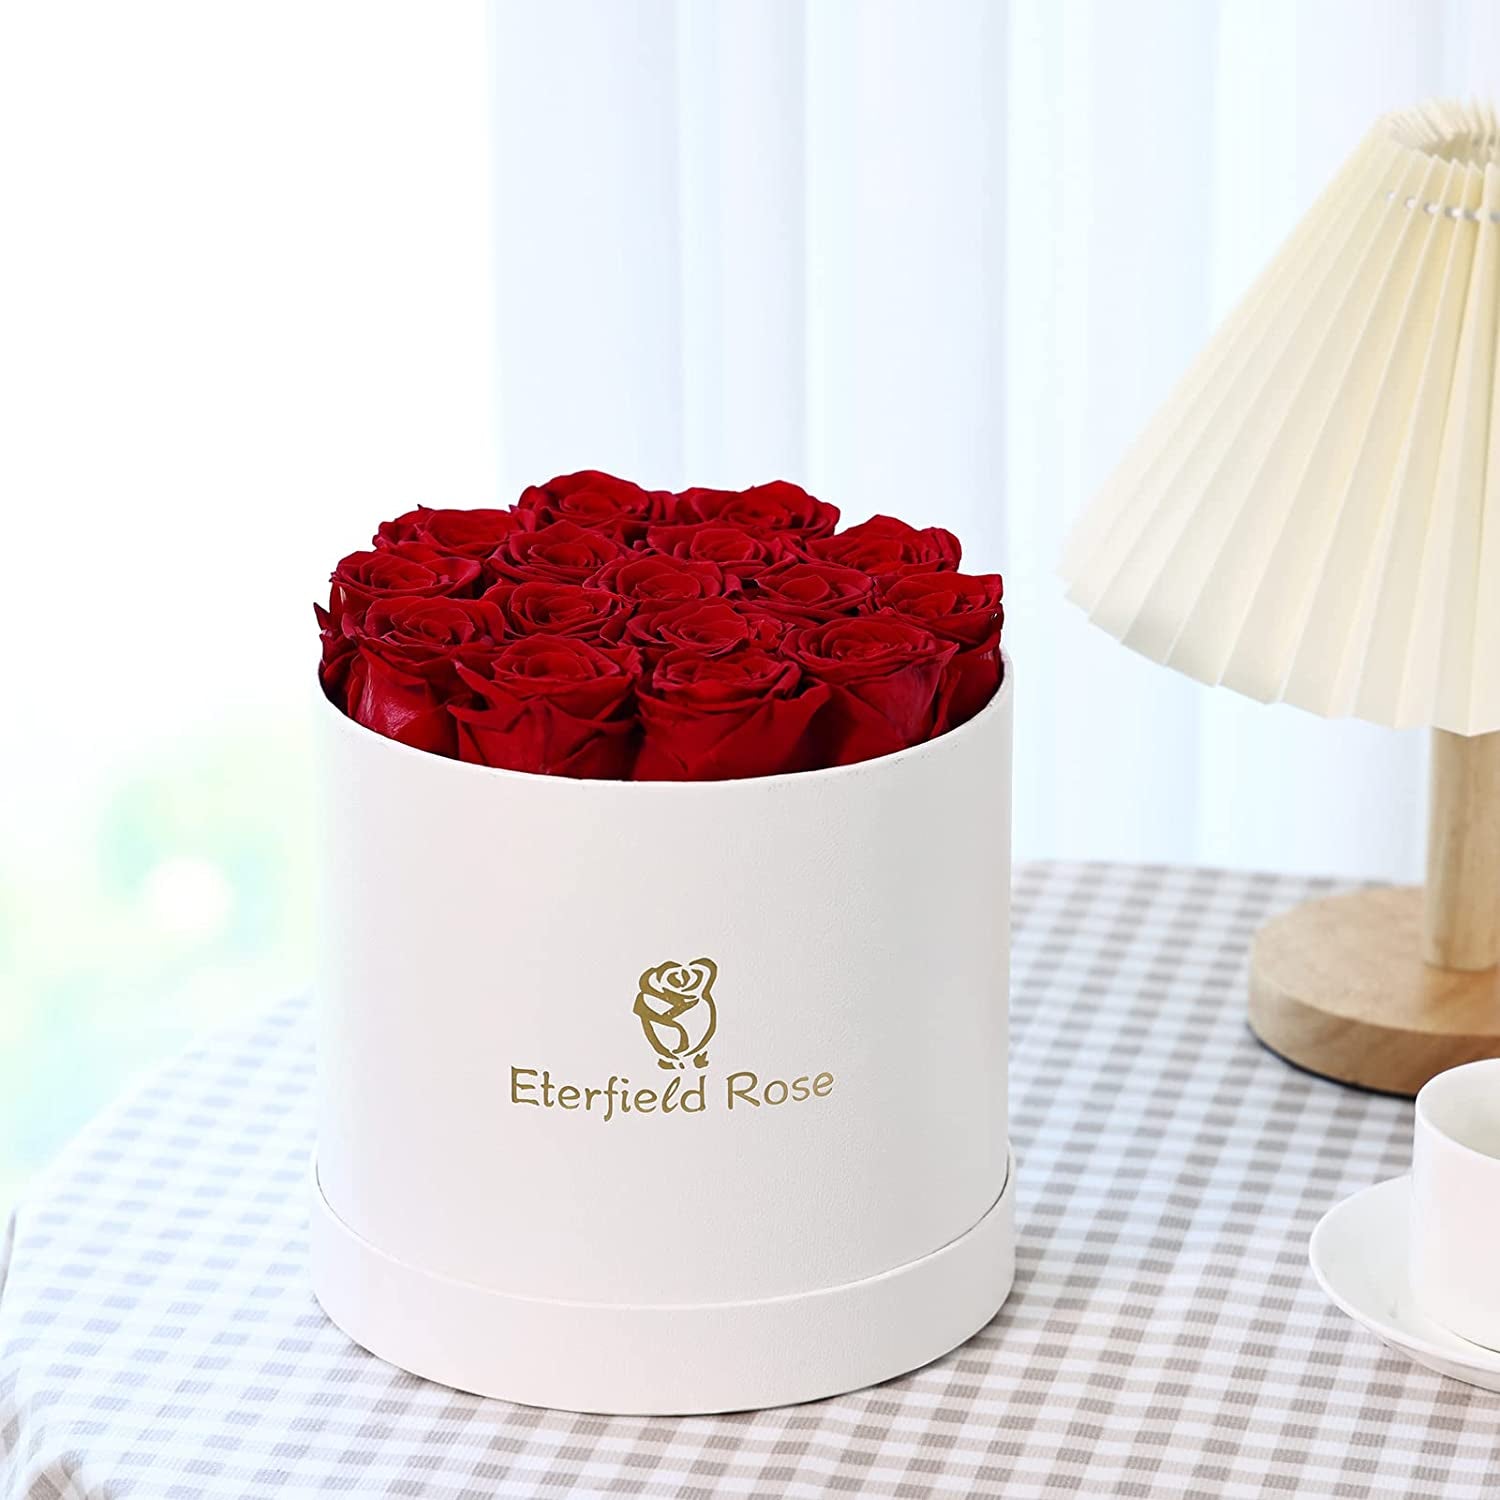 16-Piece Forever Flowers Preserved Rose in a Box Real Roses That Last a Year Preserved Flowers for Delivery Prime Mothers Day Valentines Day Christmas Day (Red Roses, round White Box)